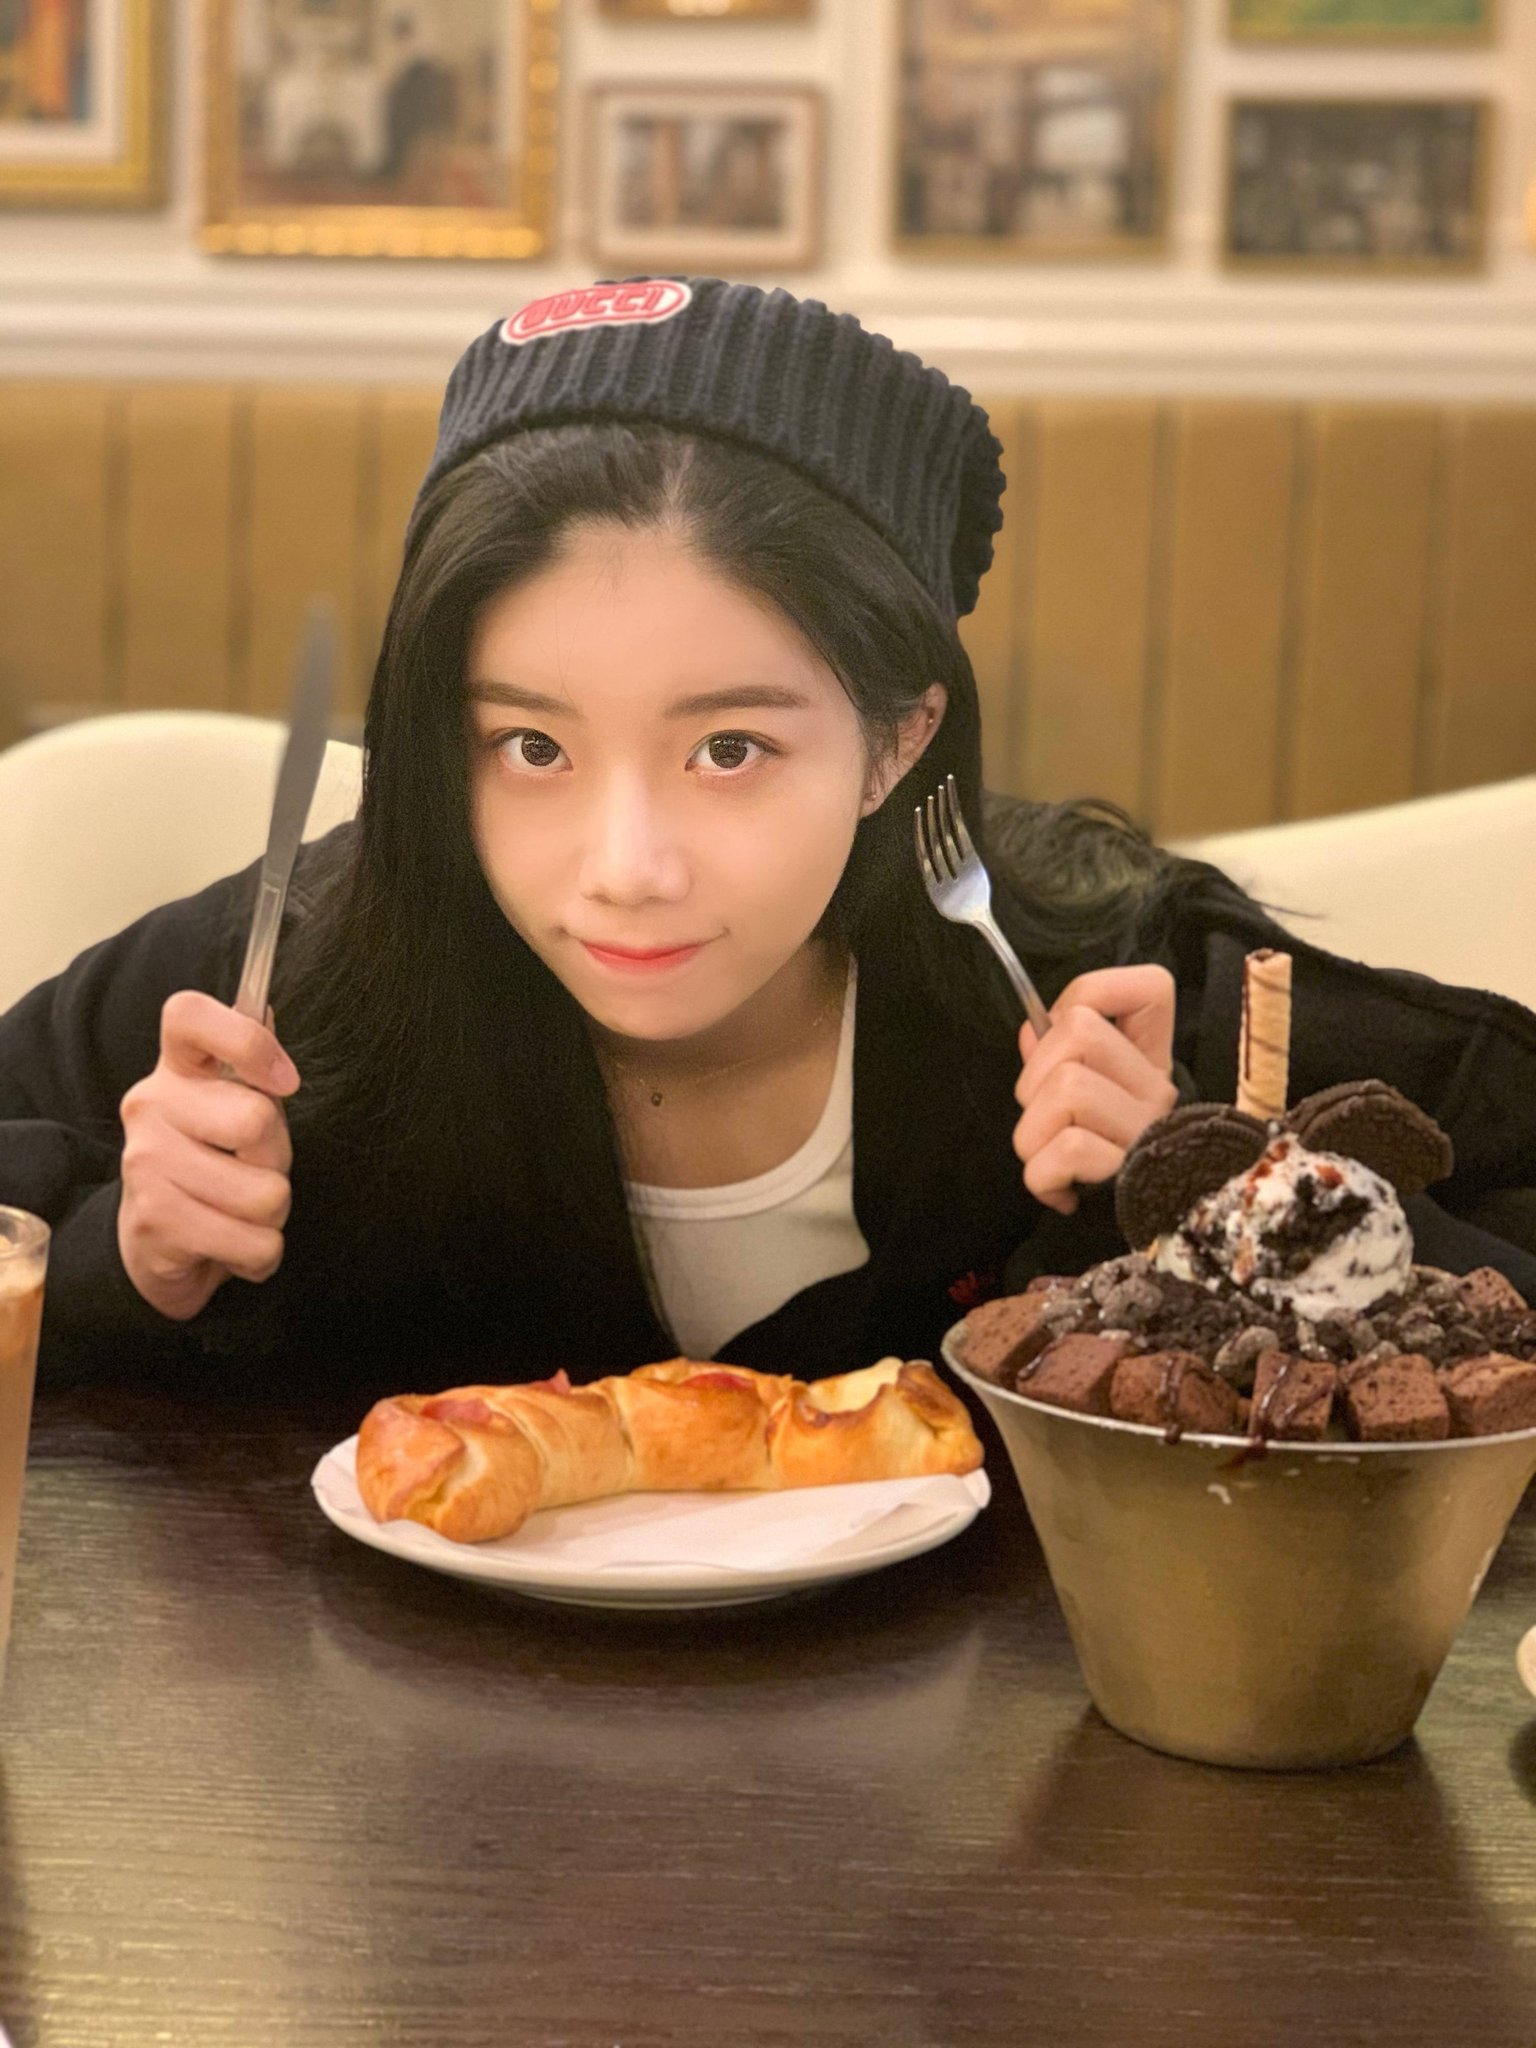 smy sitting at a table smiling cutely while holding a knife and a fork up